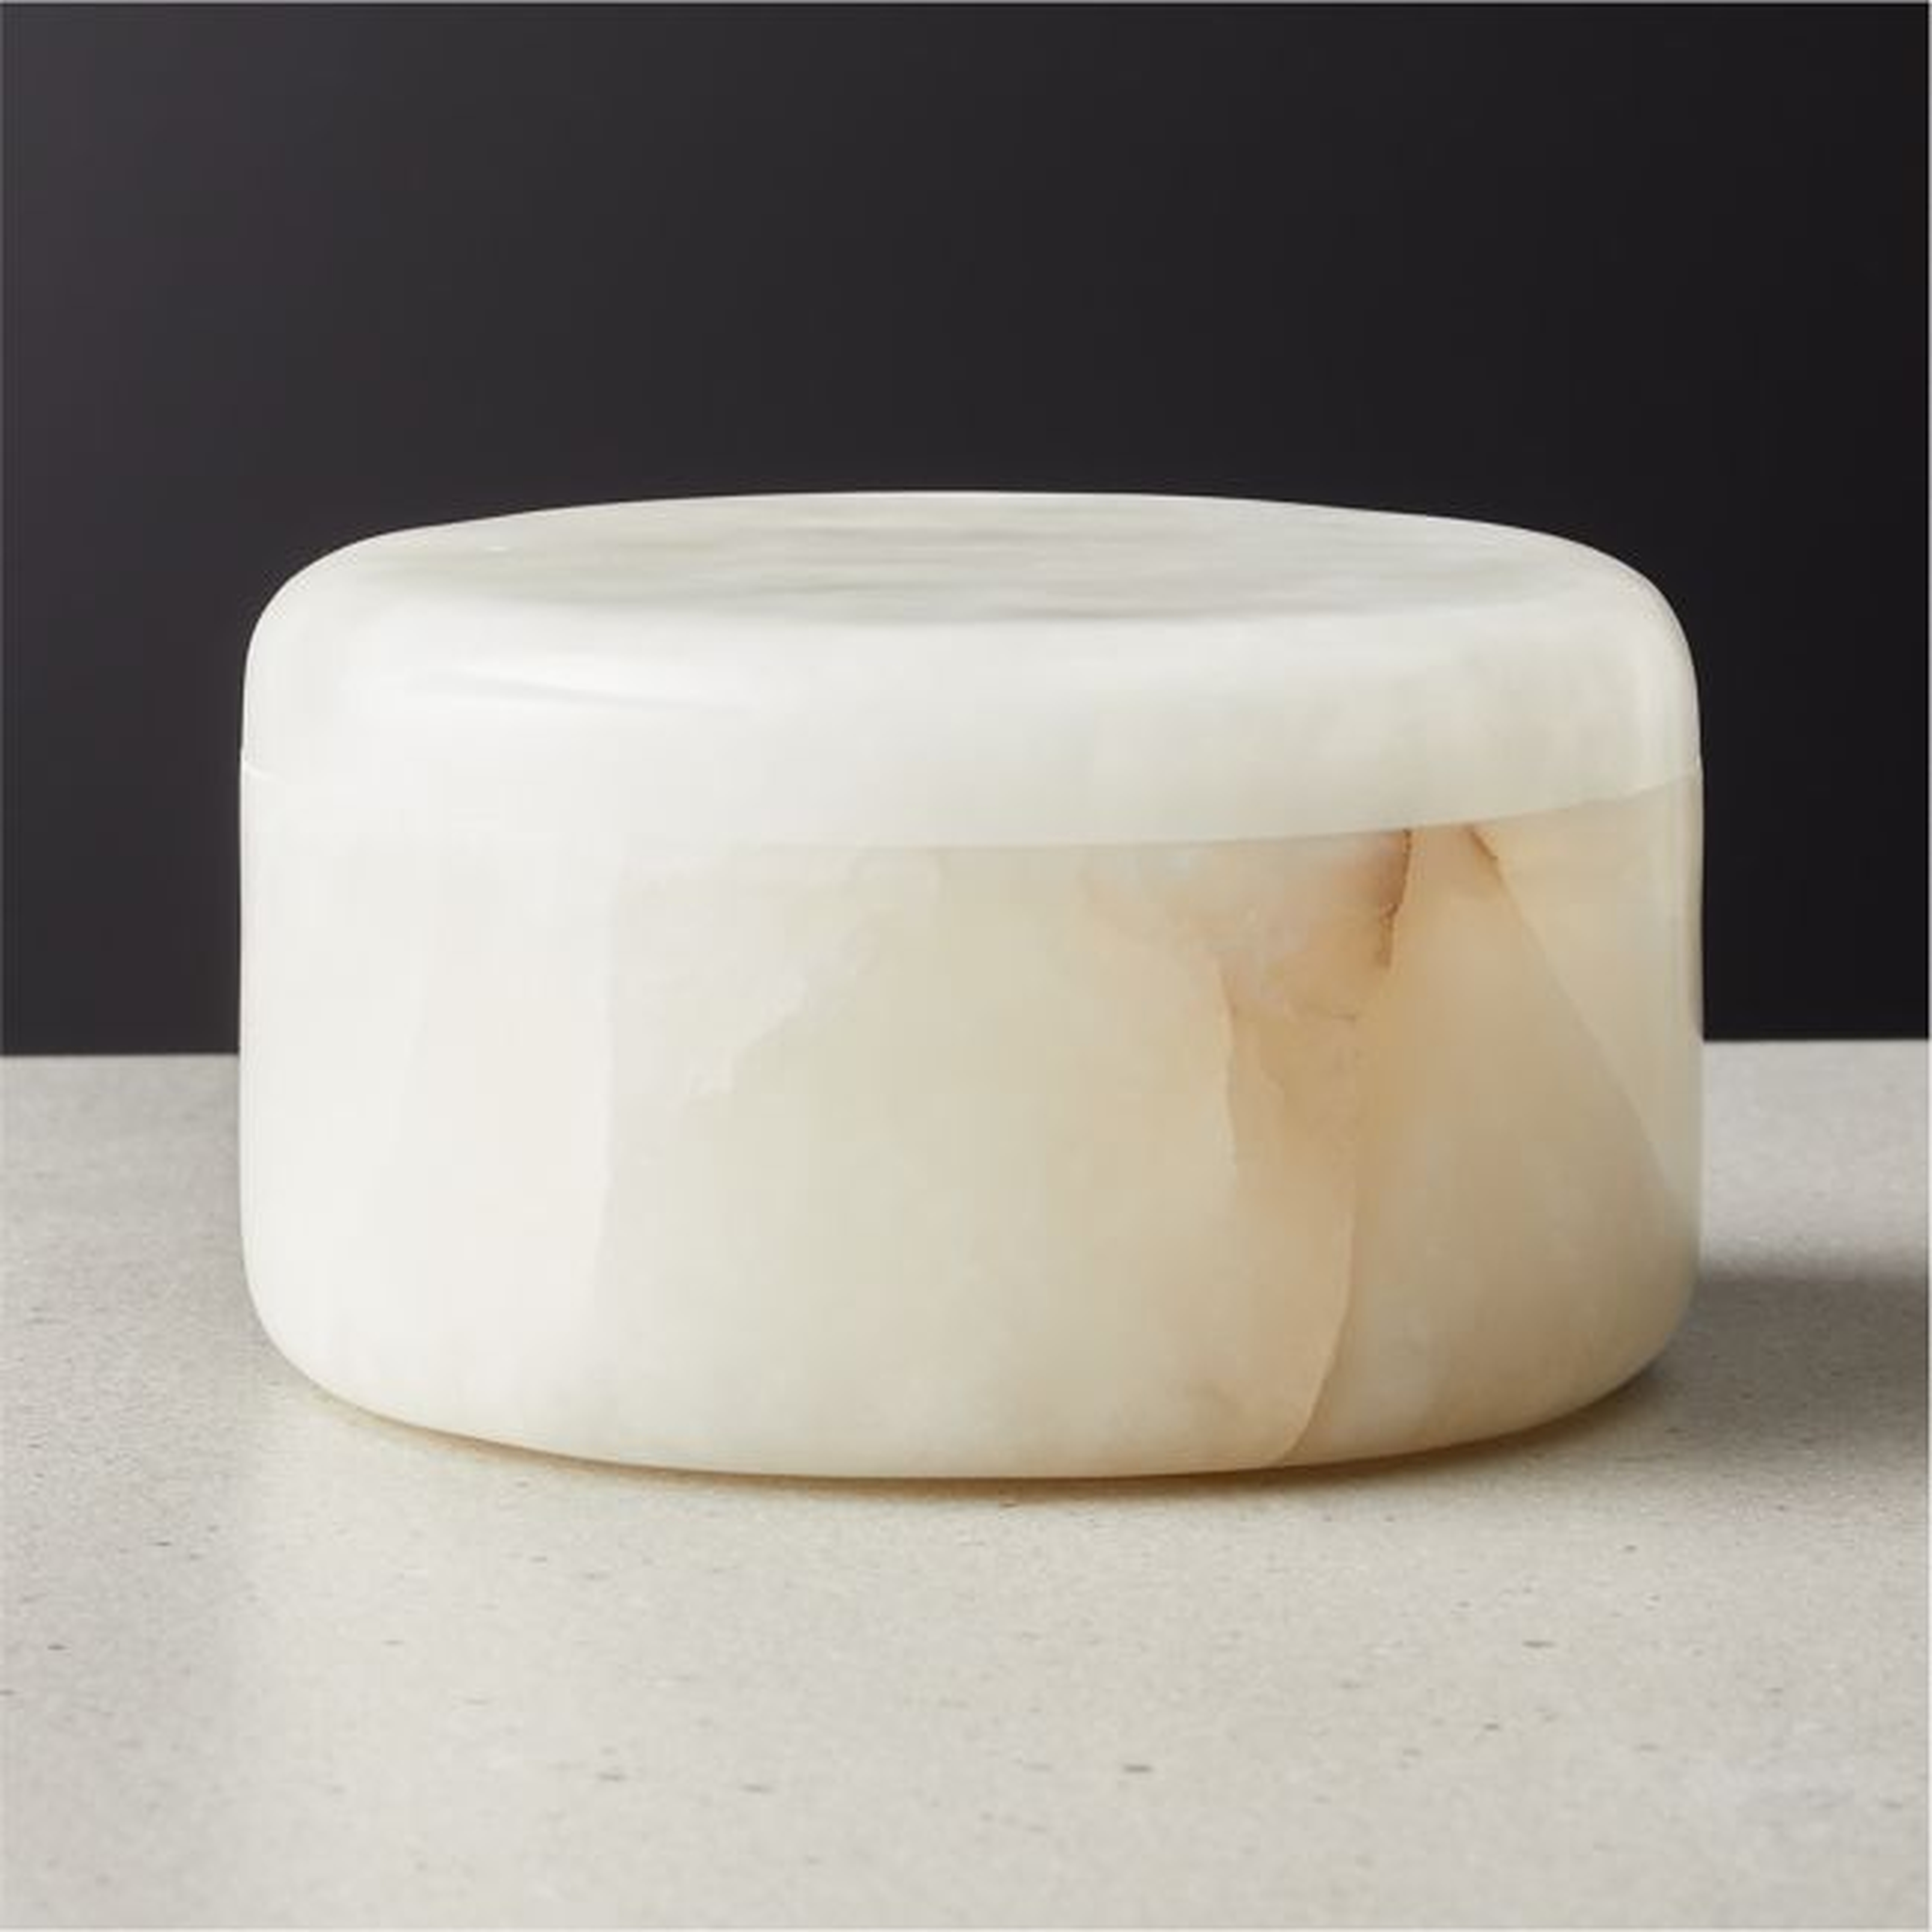 Alabaster Candle Bowl RESTOCK Late March 2022 - CB2